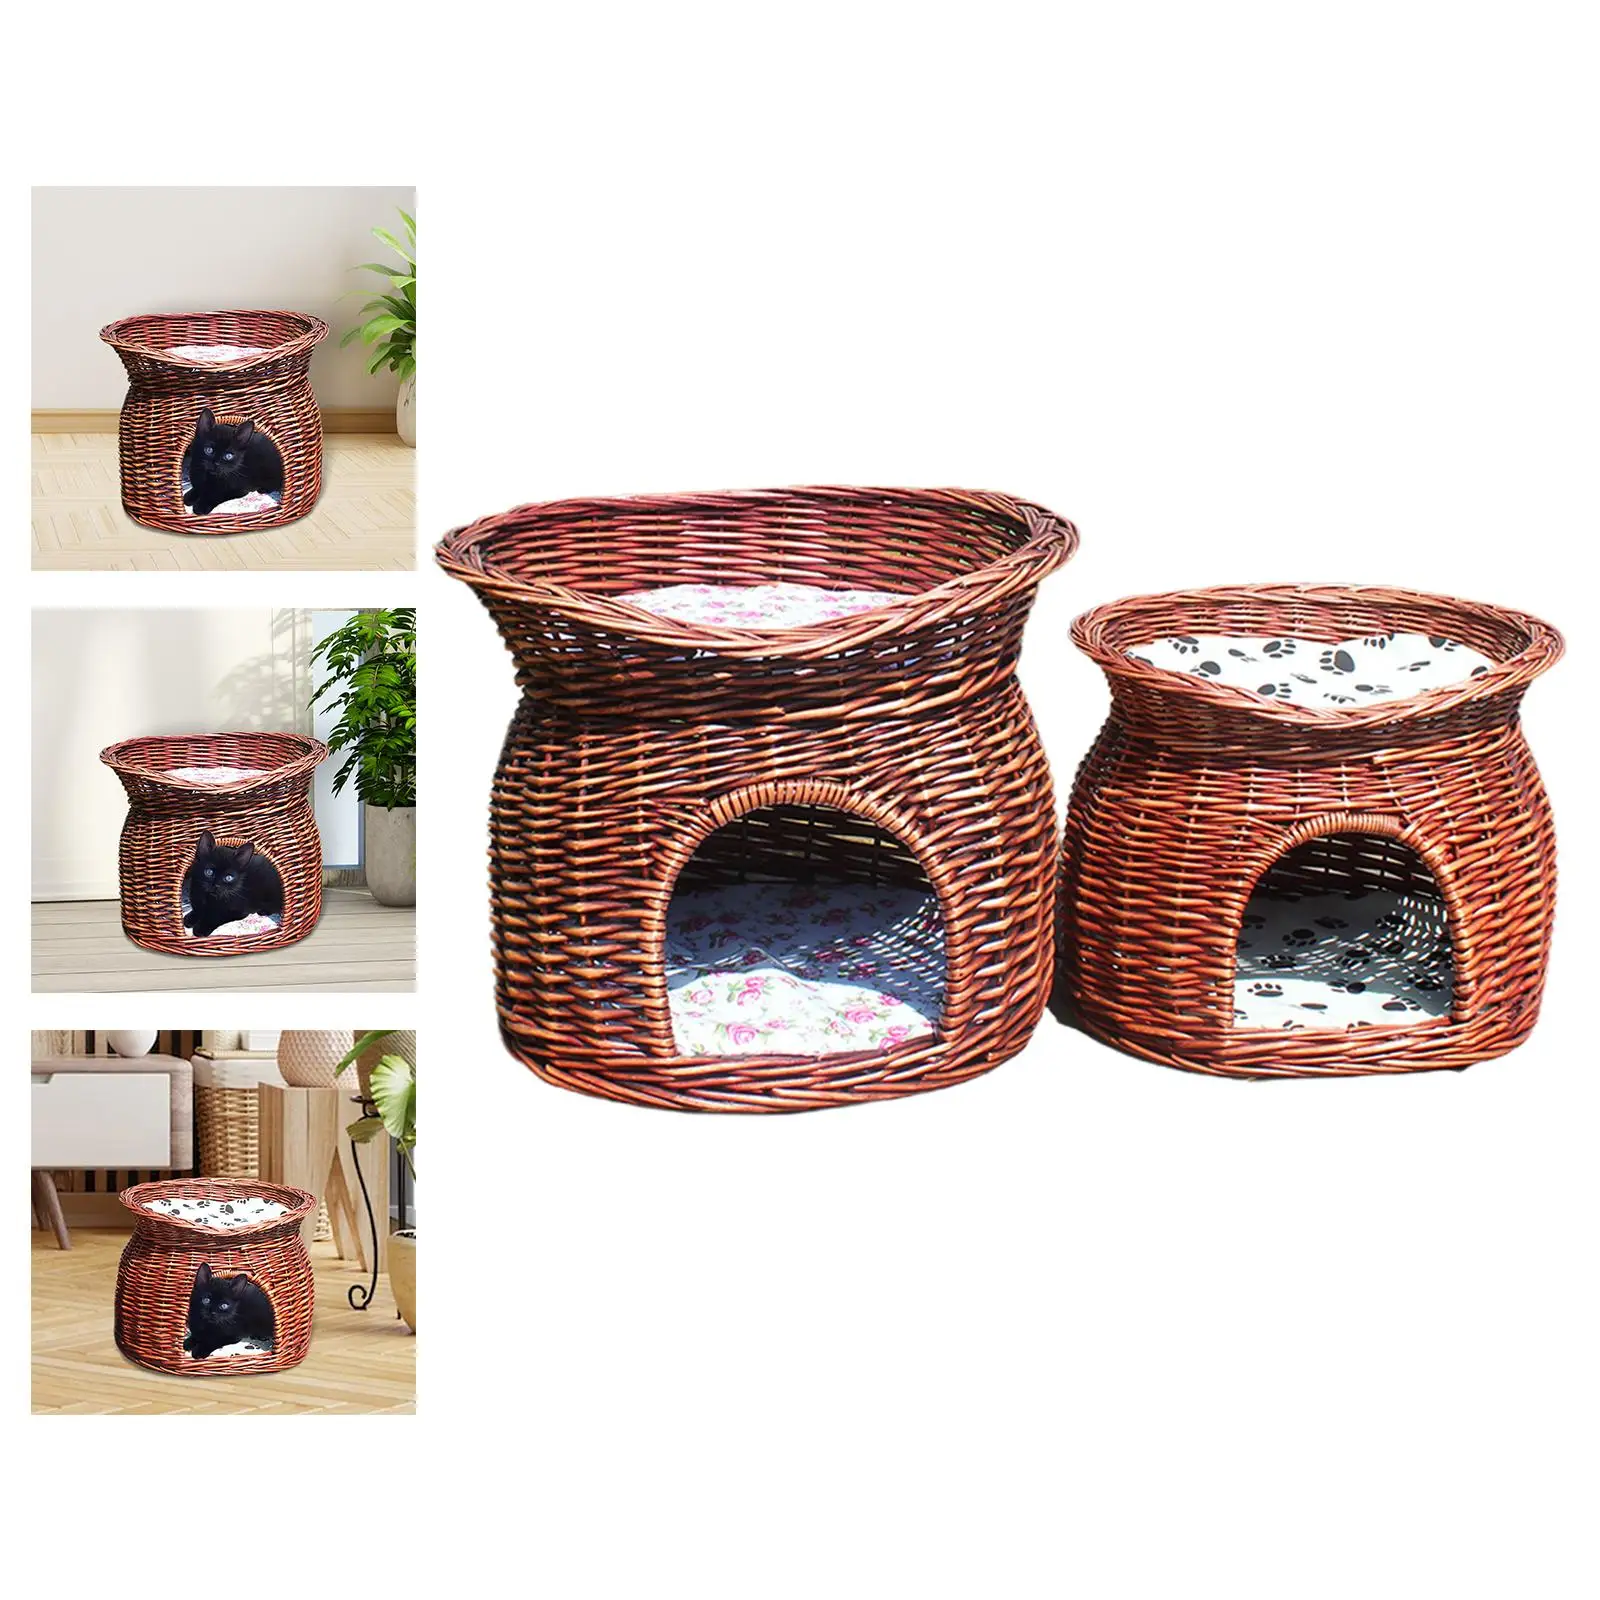 Pet House Rattan Woven Semi Enclosed Summer Kitten Cave Tent with Cushion Cat Nest Dog Bed Kitten House Wicker Basket Cat Bed